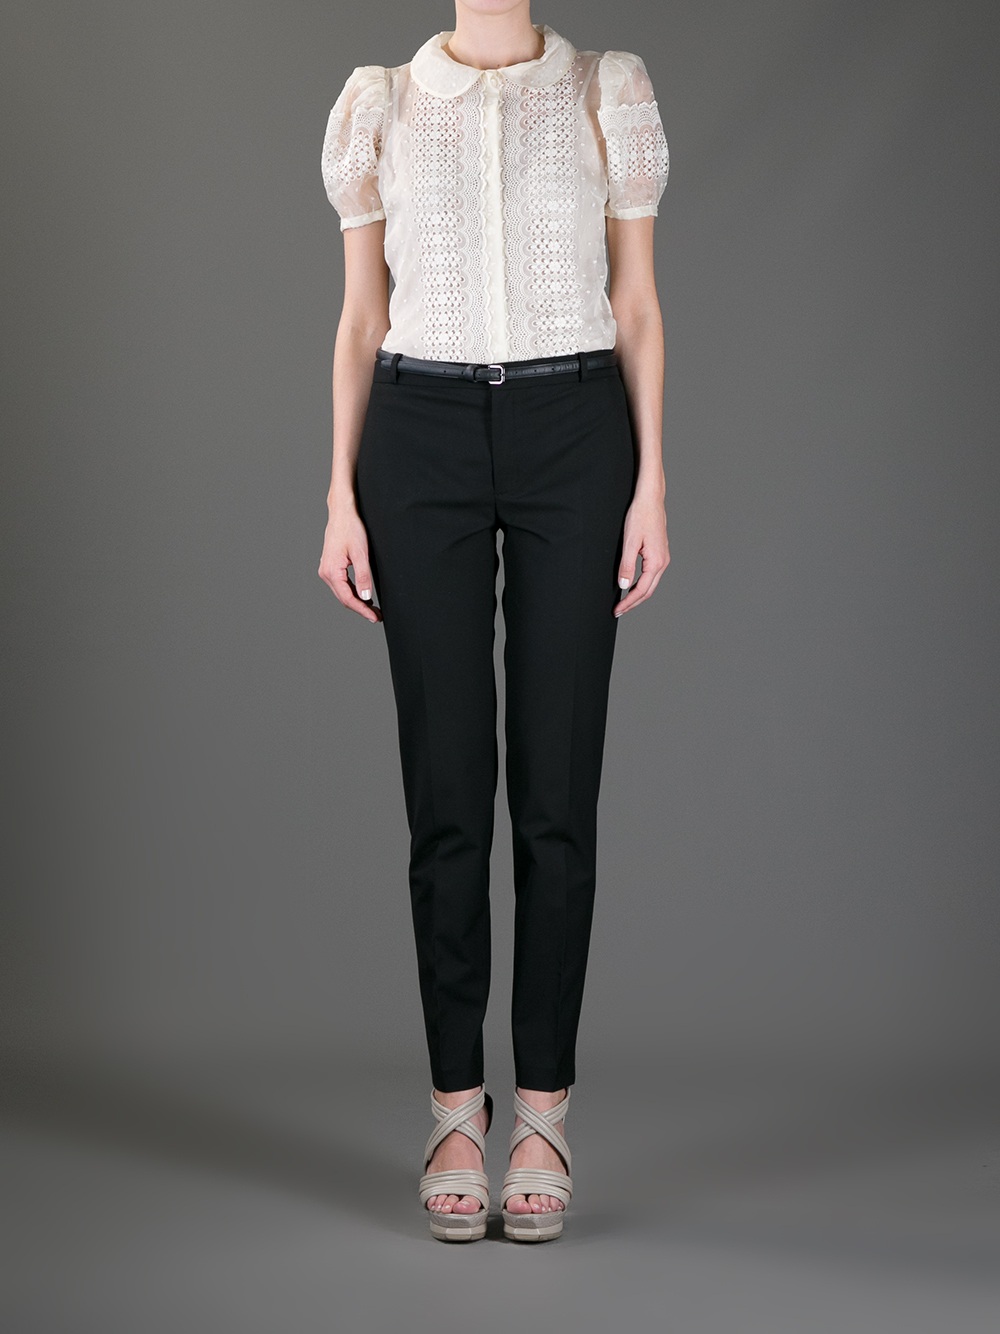 RED Valentino Lace Crochet Blouse in White - Lyst